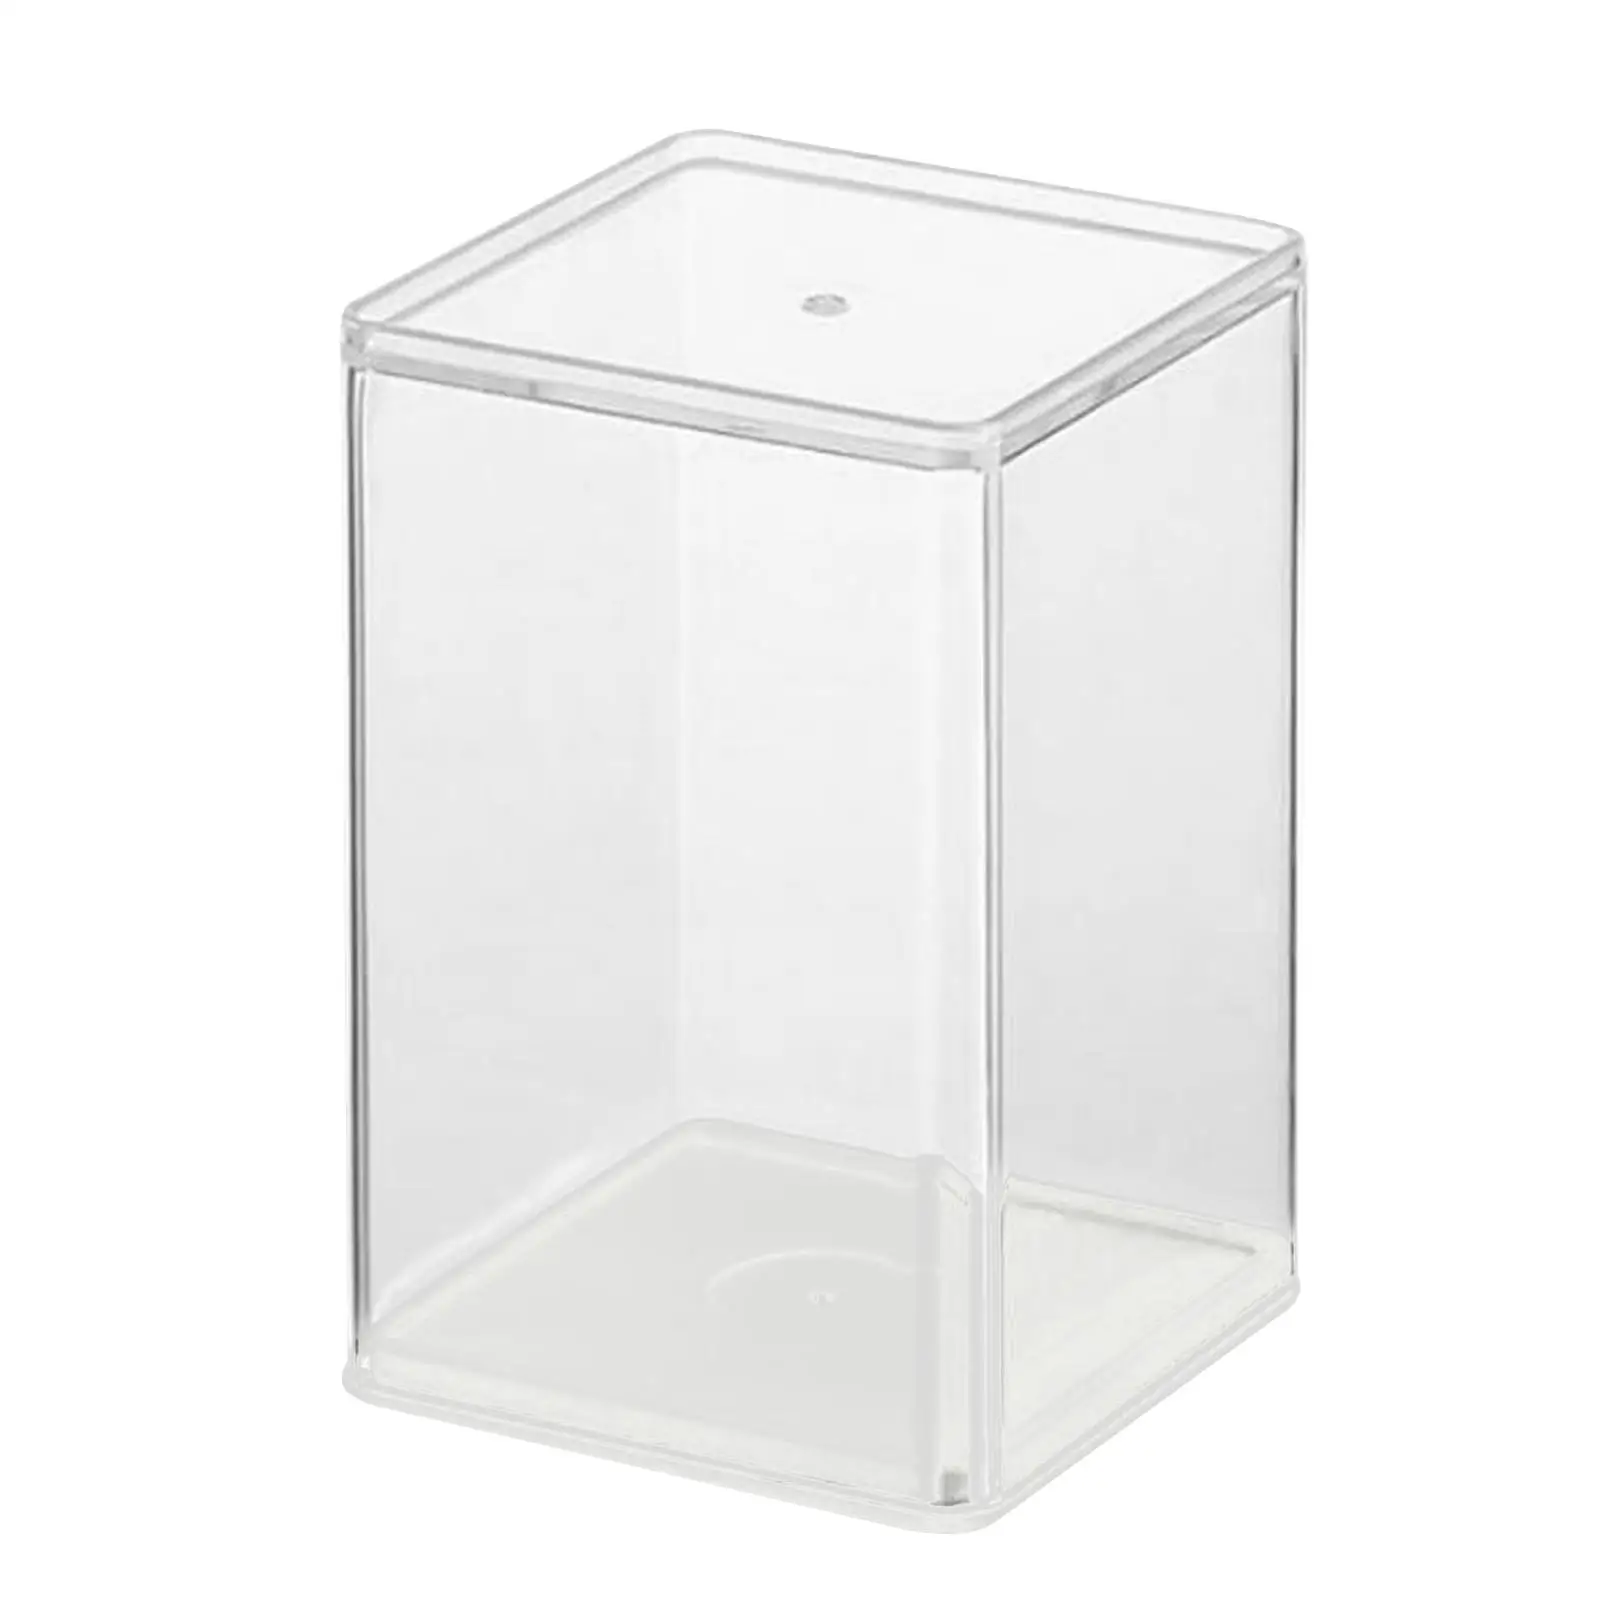 Transparent Acrylic Case Display Box Shelves Free Standing Stand Protection Dust Cabinet for Toys Collectibles Adult Kids